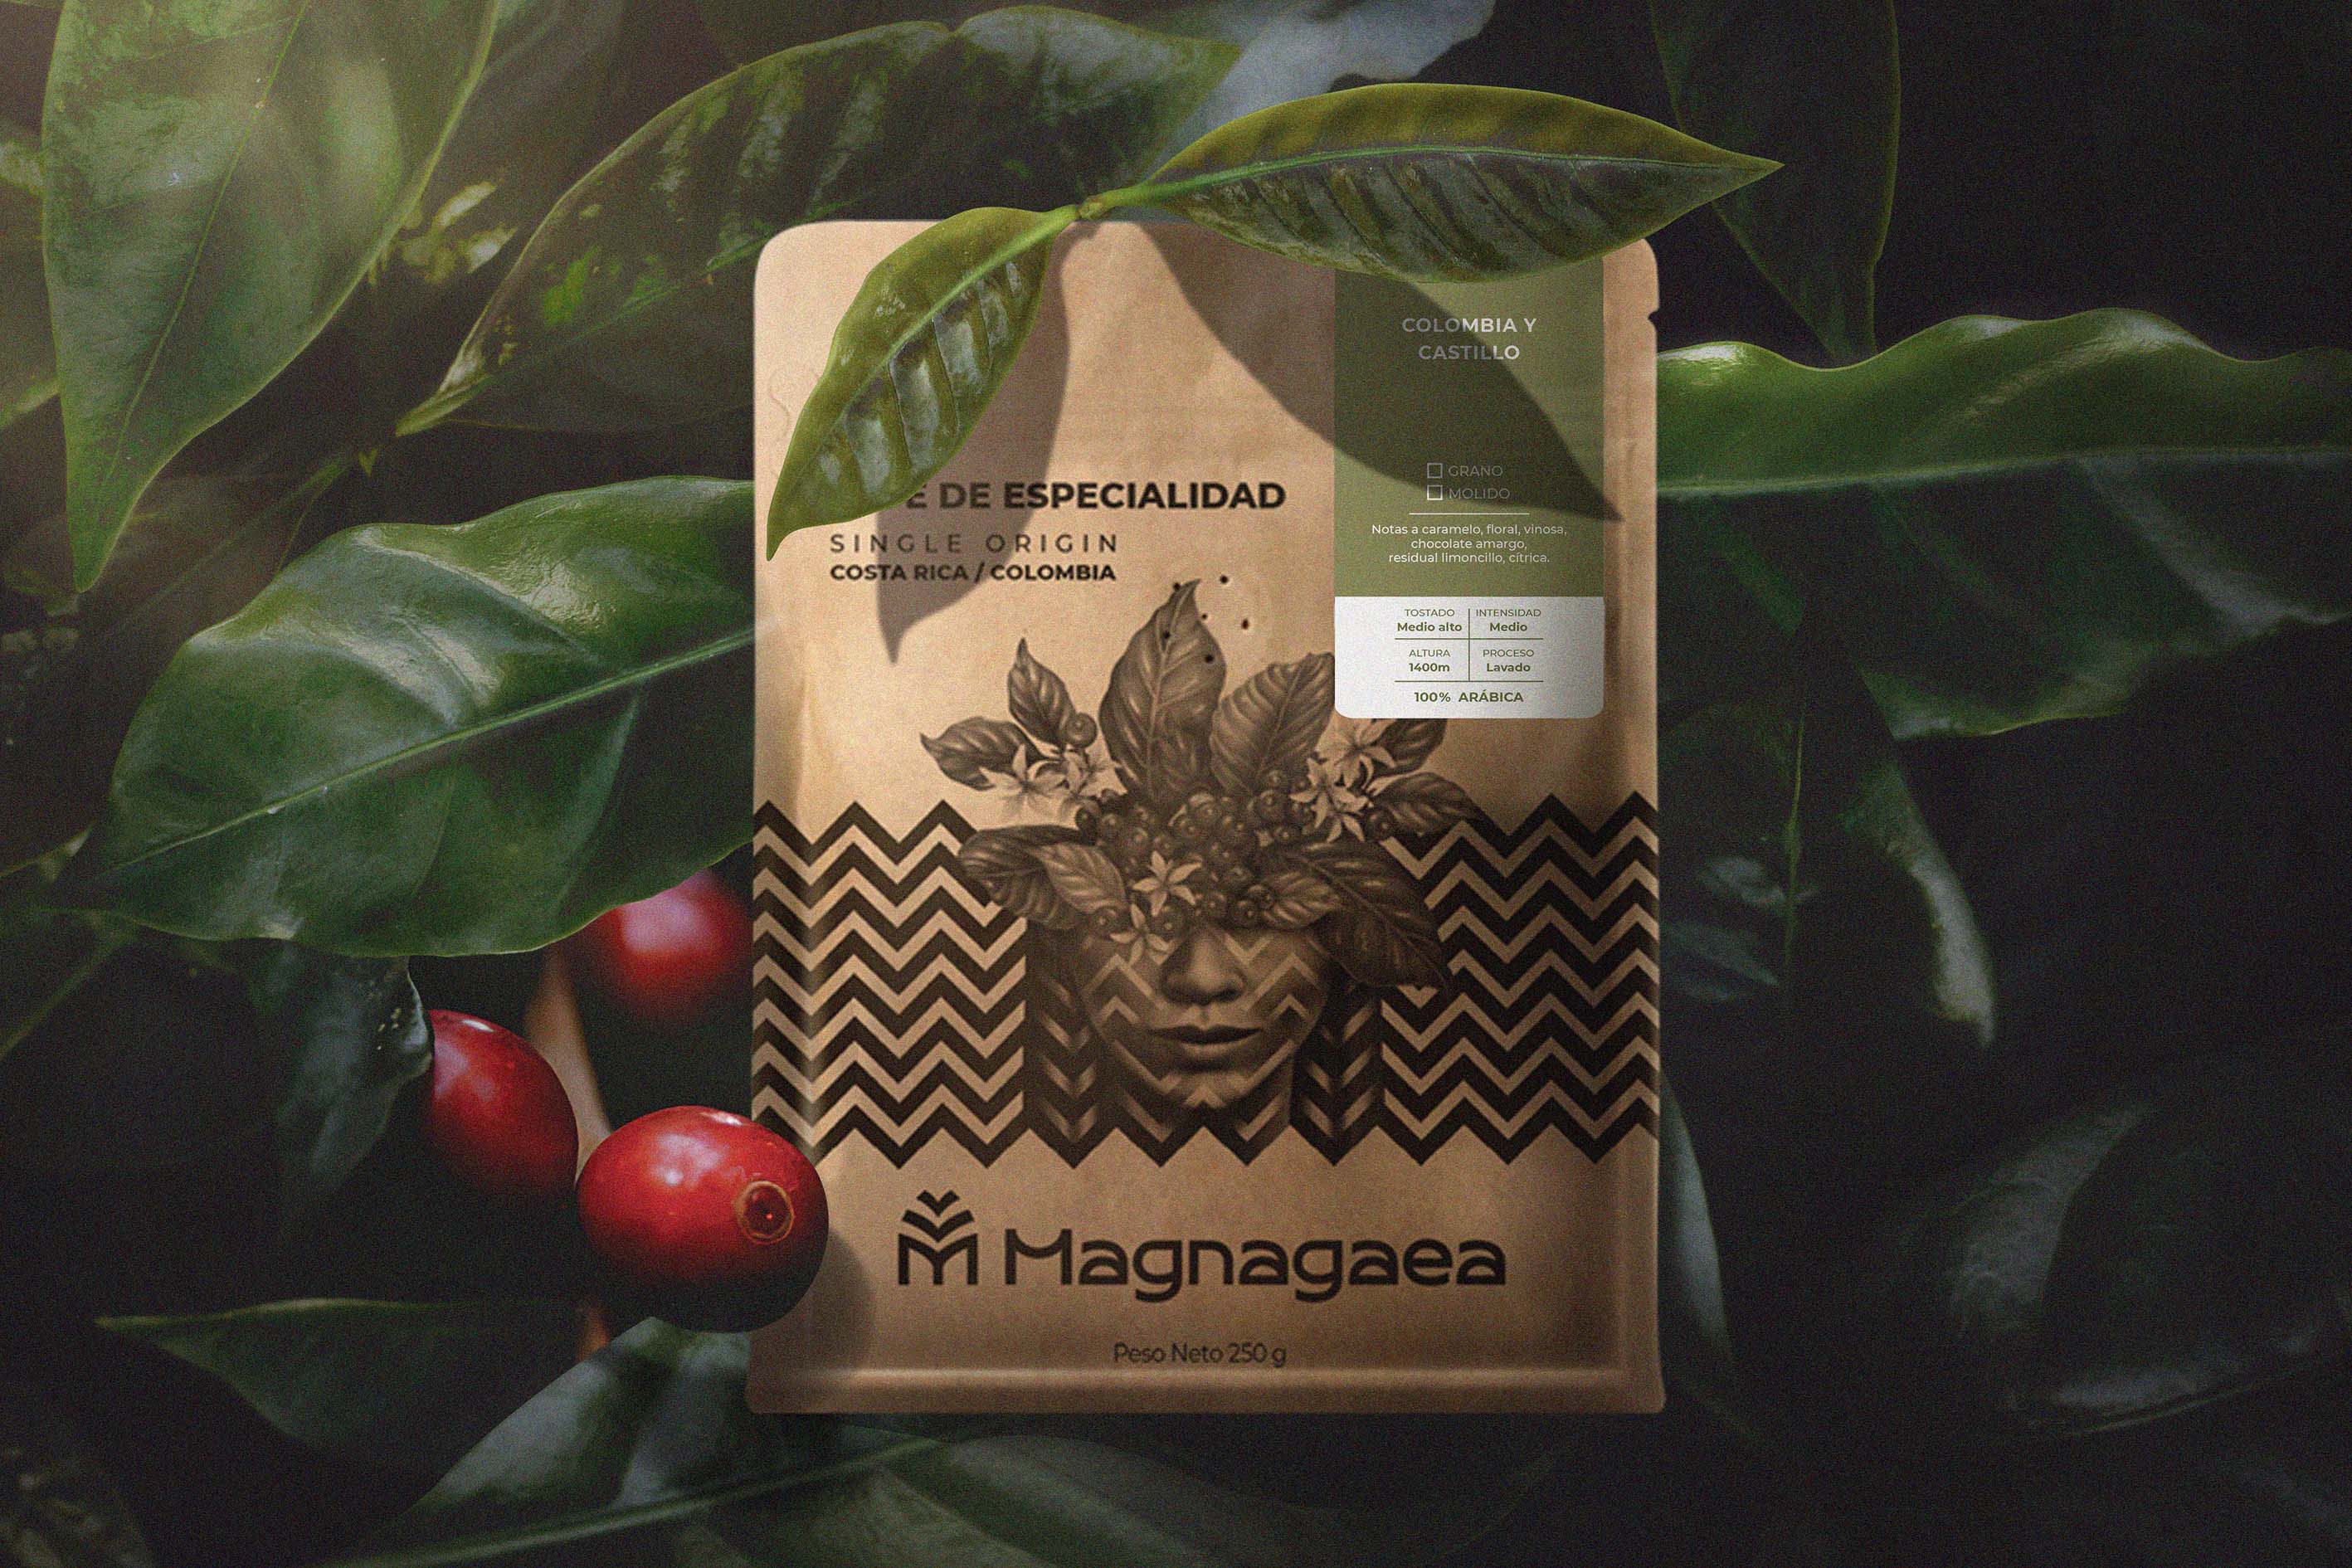 NEV Designer Crafts Magnagaea’s Organic Coffee Brand Identity and an Illustrative Packaging Design